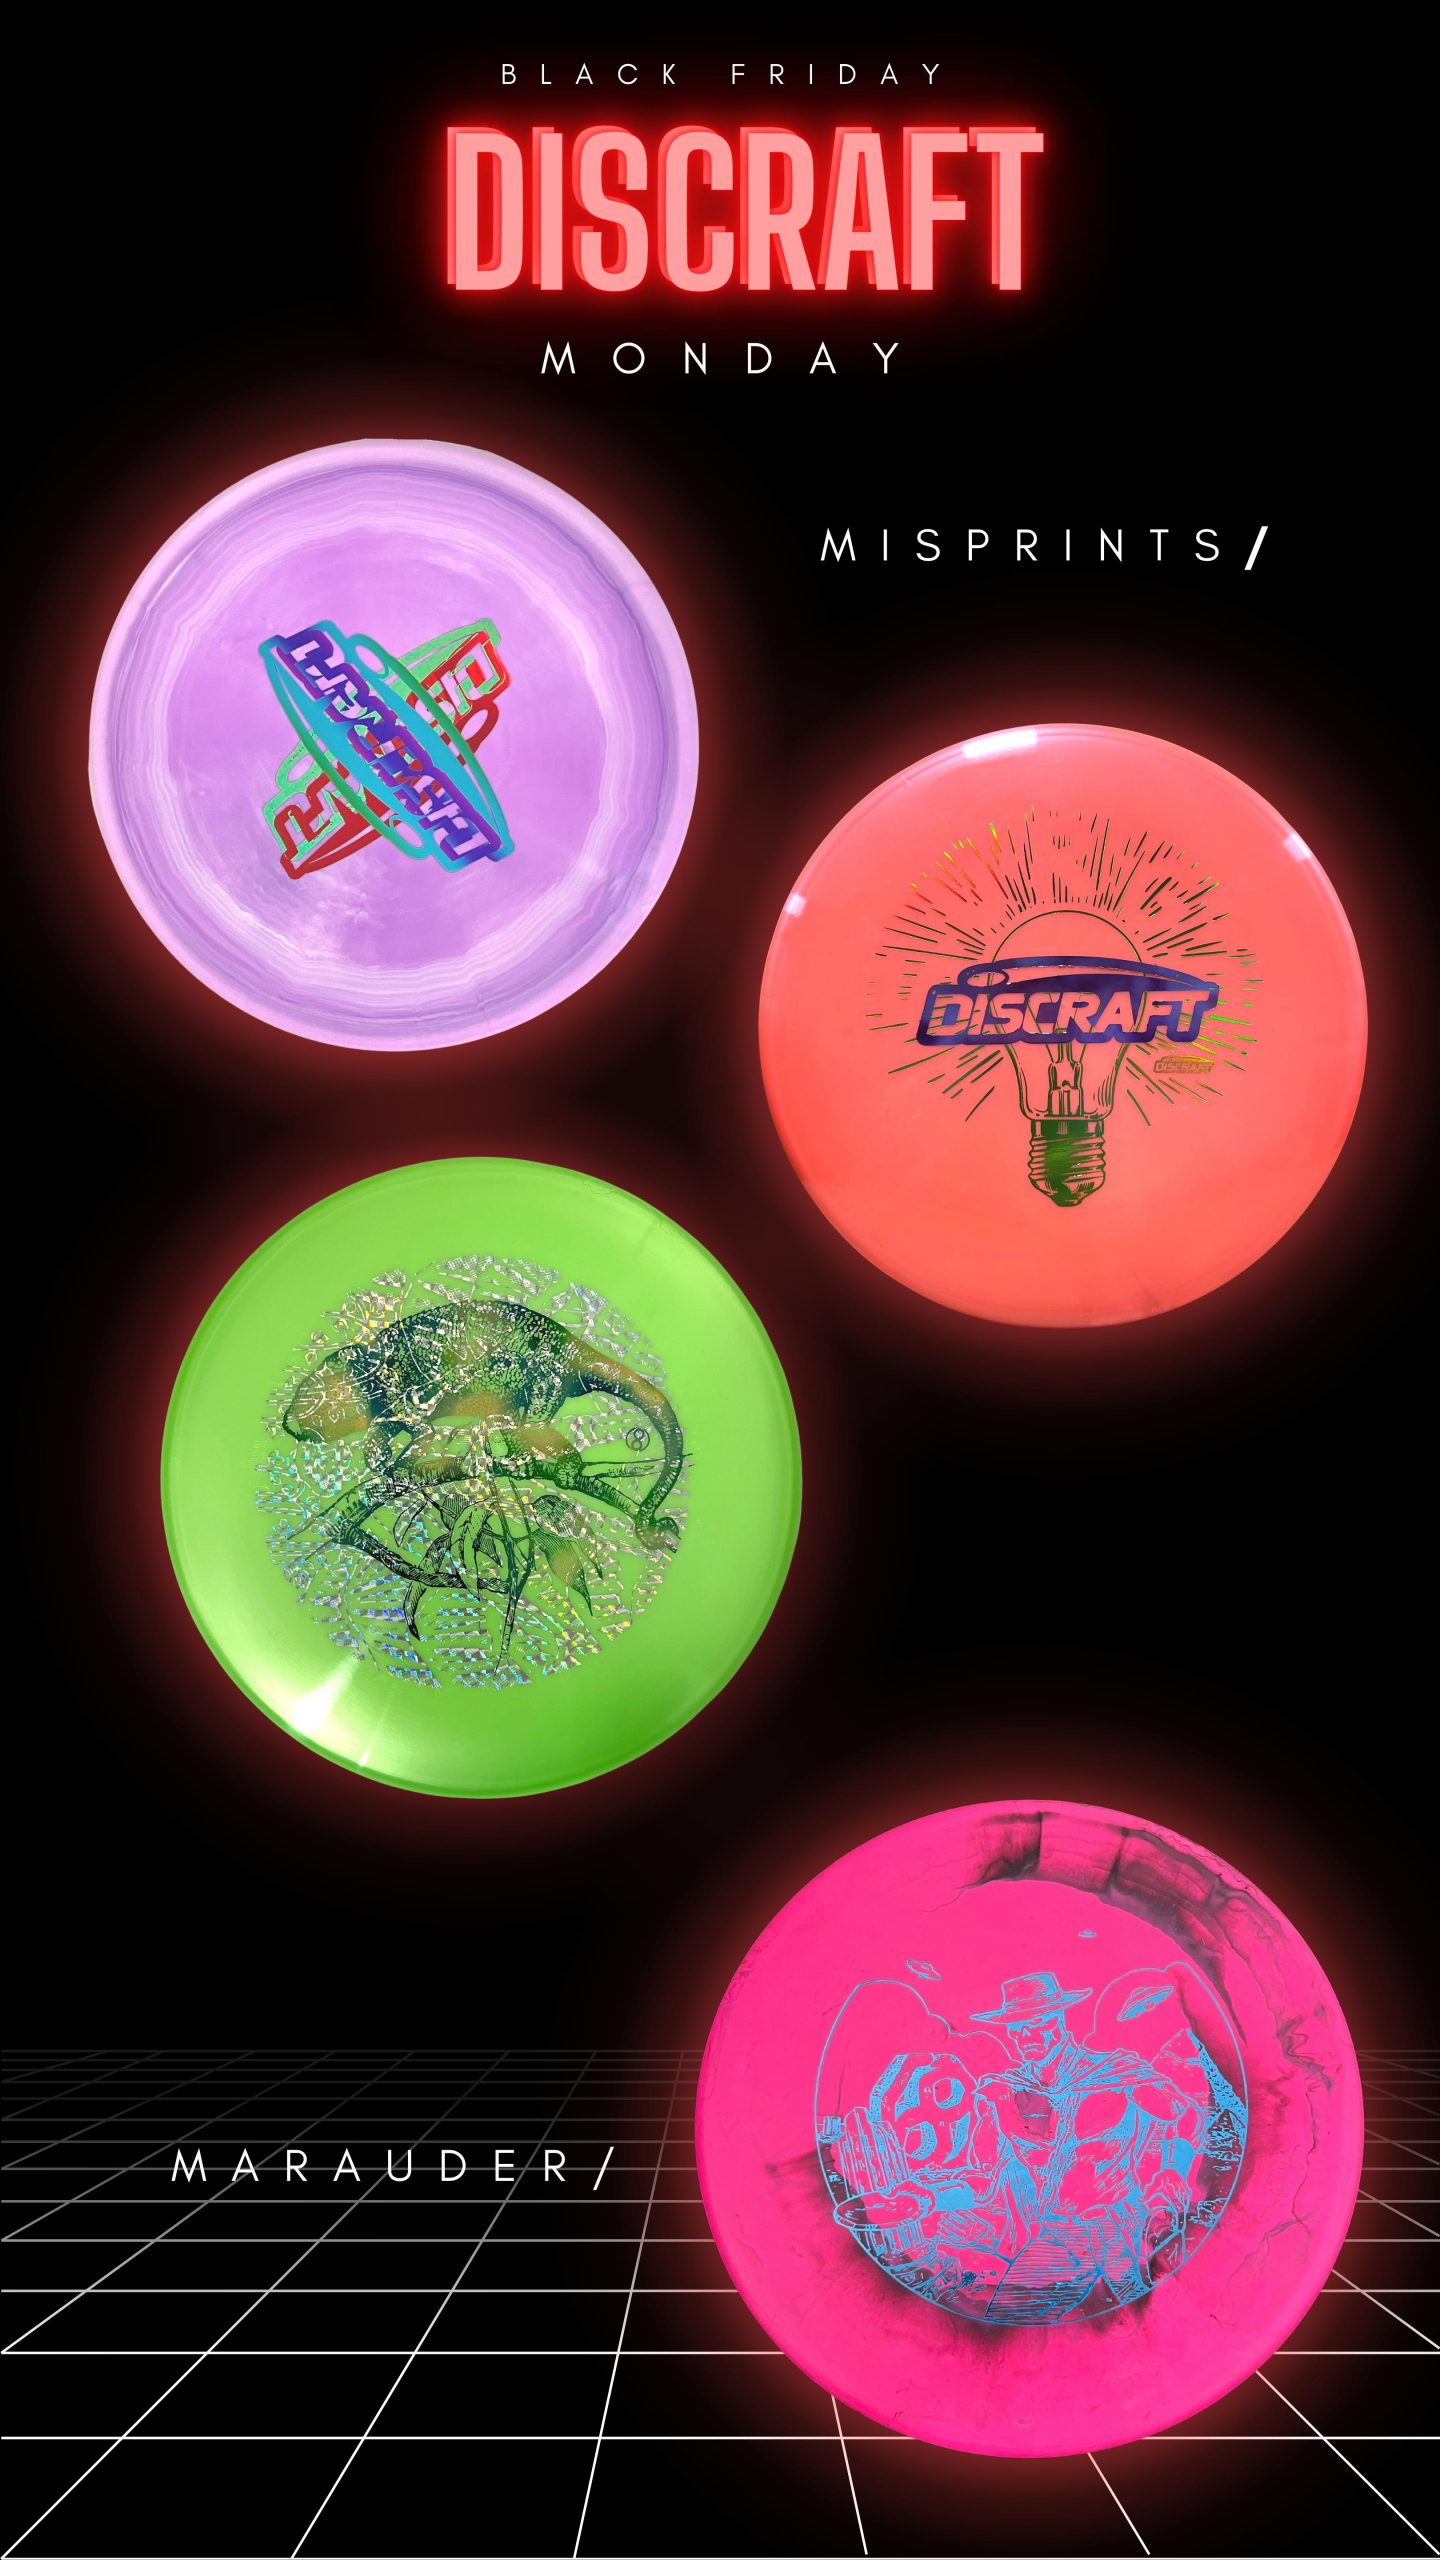 Discraft Cyber Monday Misprint and special edition Marauder stamp